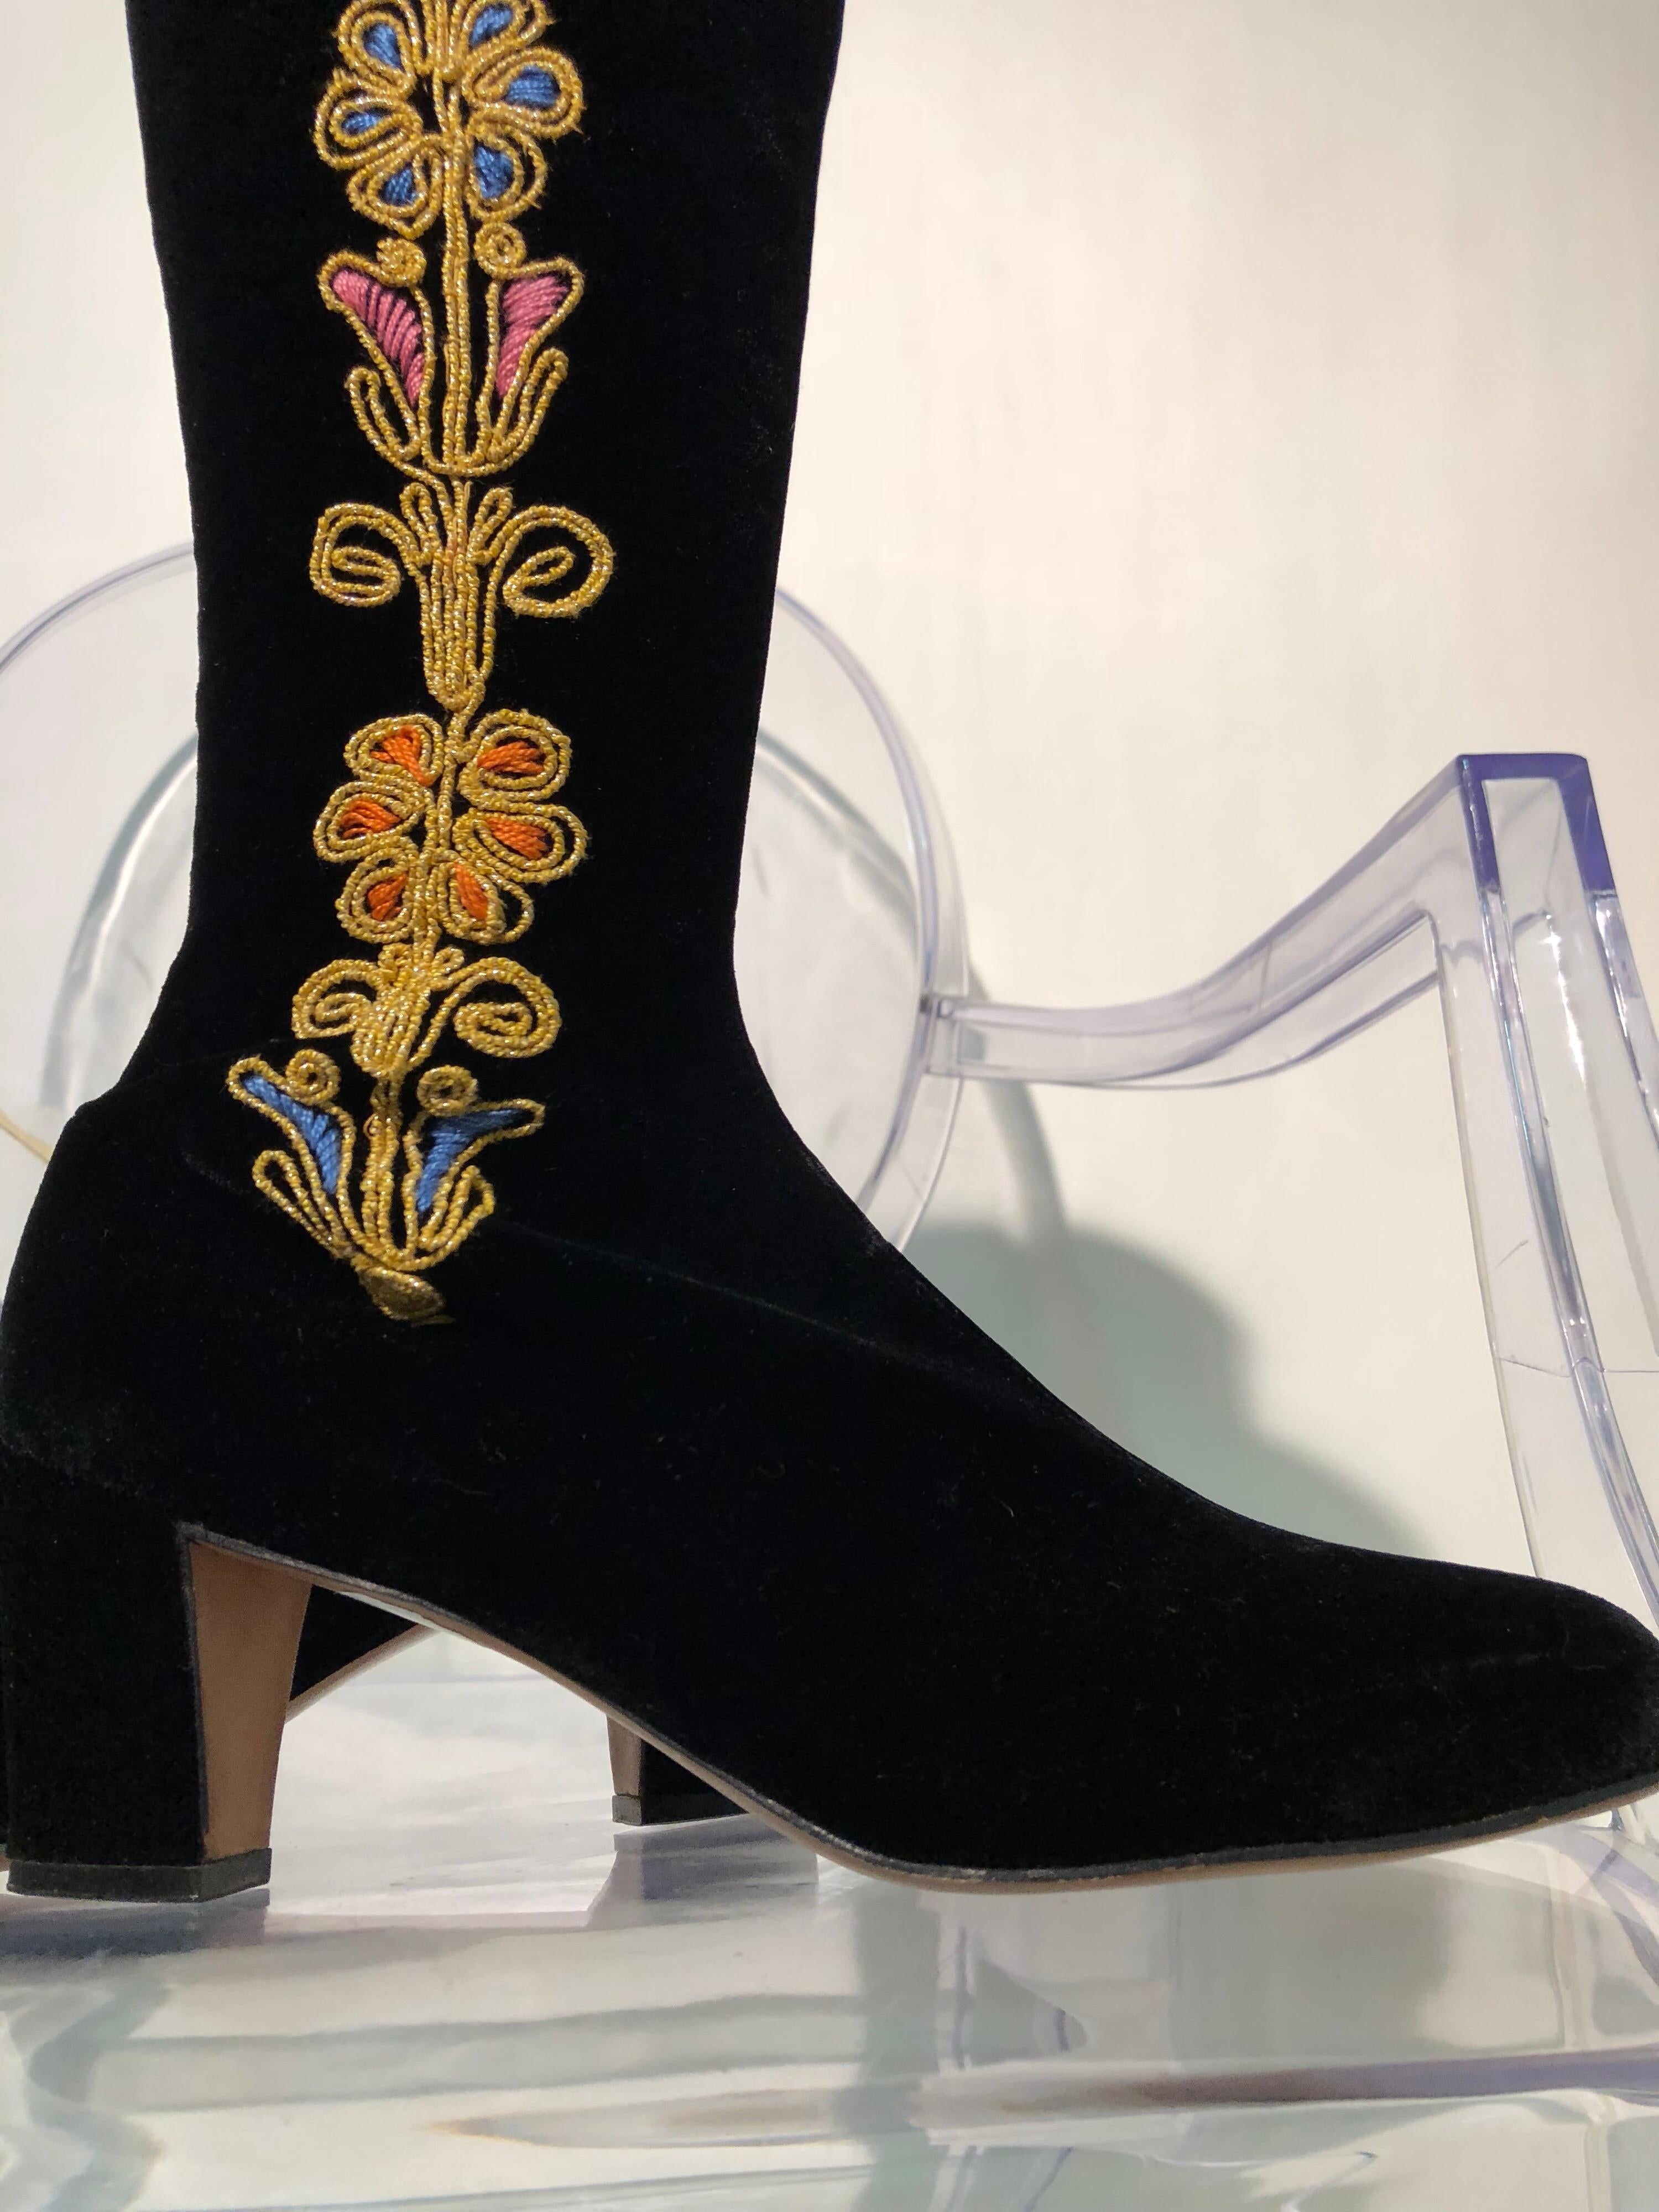 A marvelous never worn pair of 1960s Black cotton velvet boots. Hitting just below the knee, and made by Beth's Bootery, these have a super-Mod rounded toe and mid-height chunky heel. Size 7A